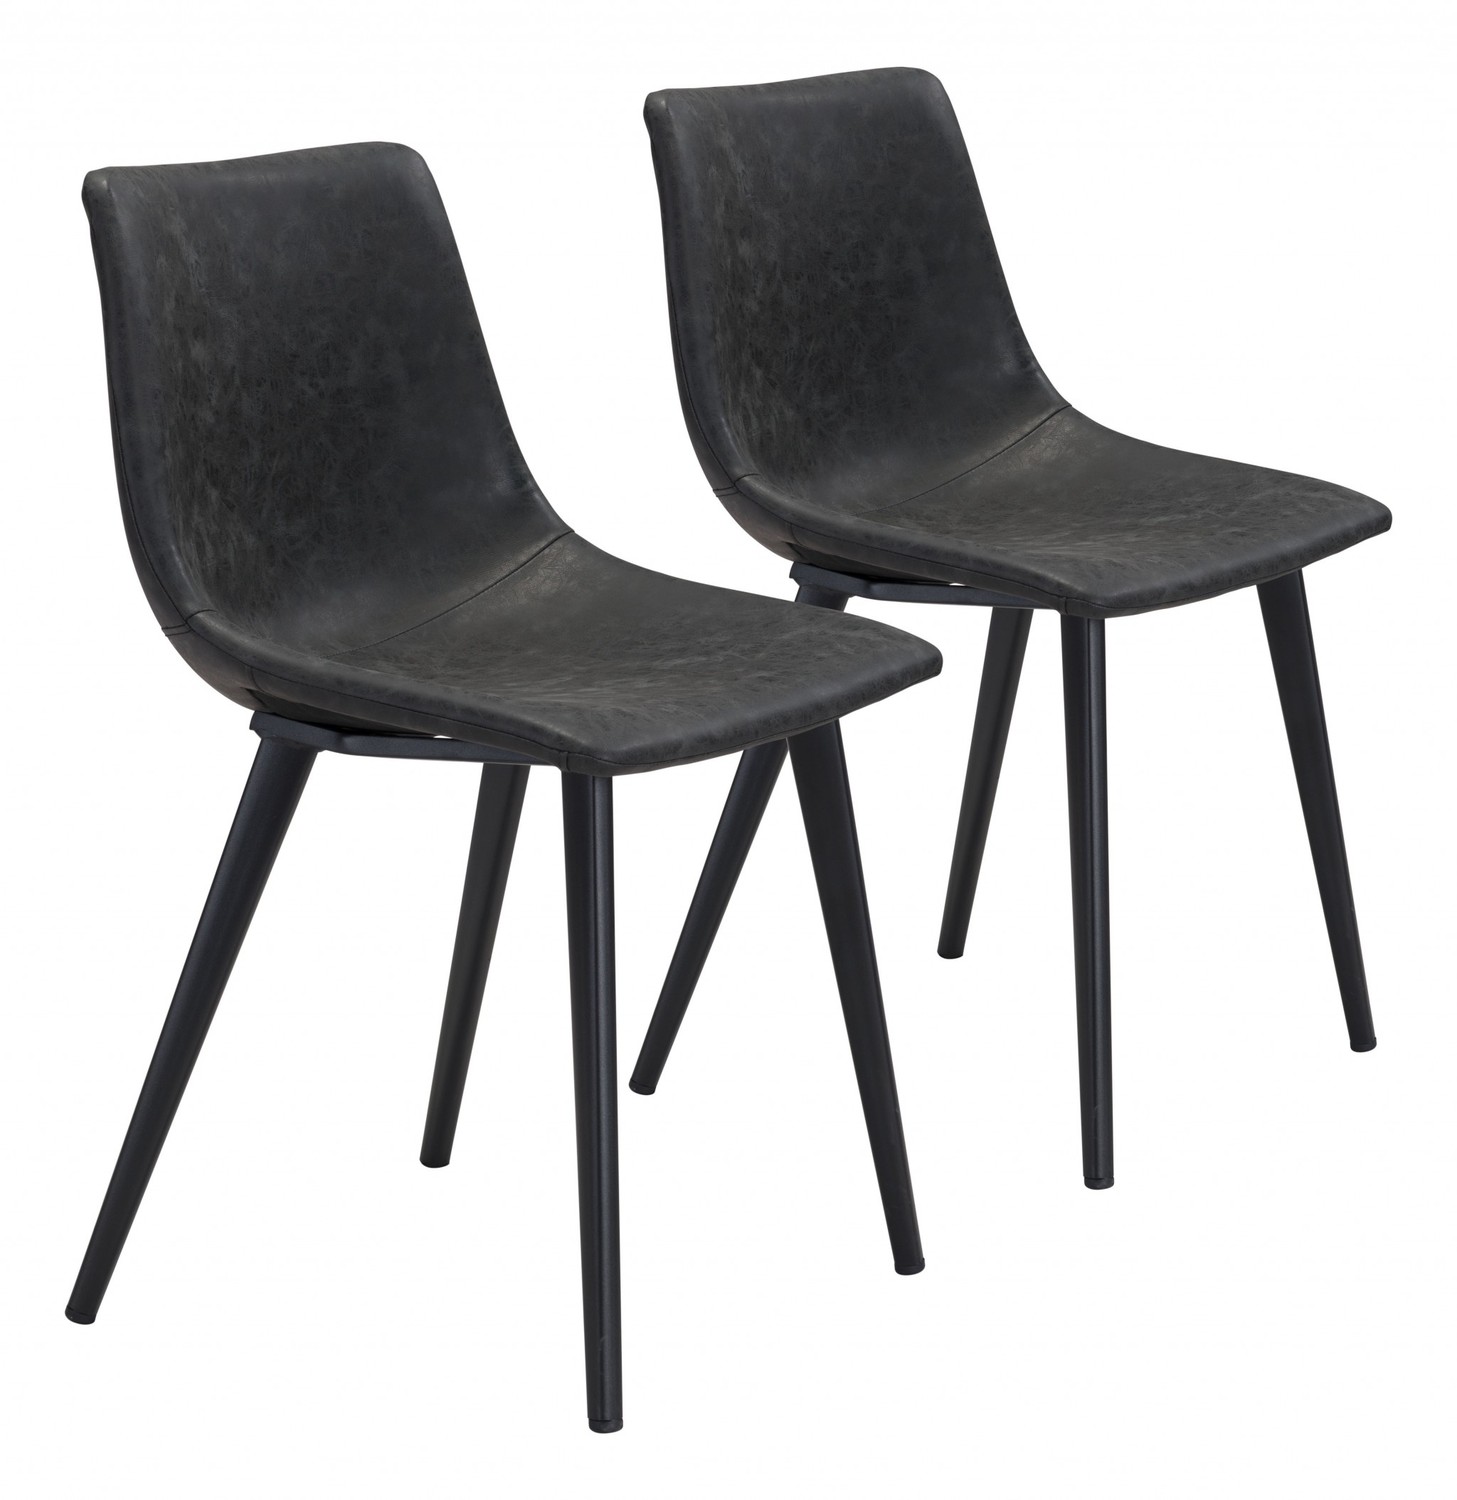 Set of Two Black Vintage Look Faux Leather Slight Scoop Dining Chairs